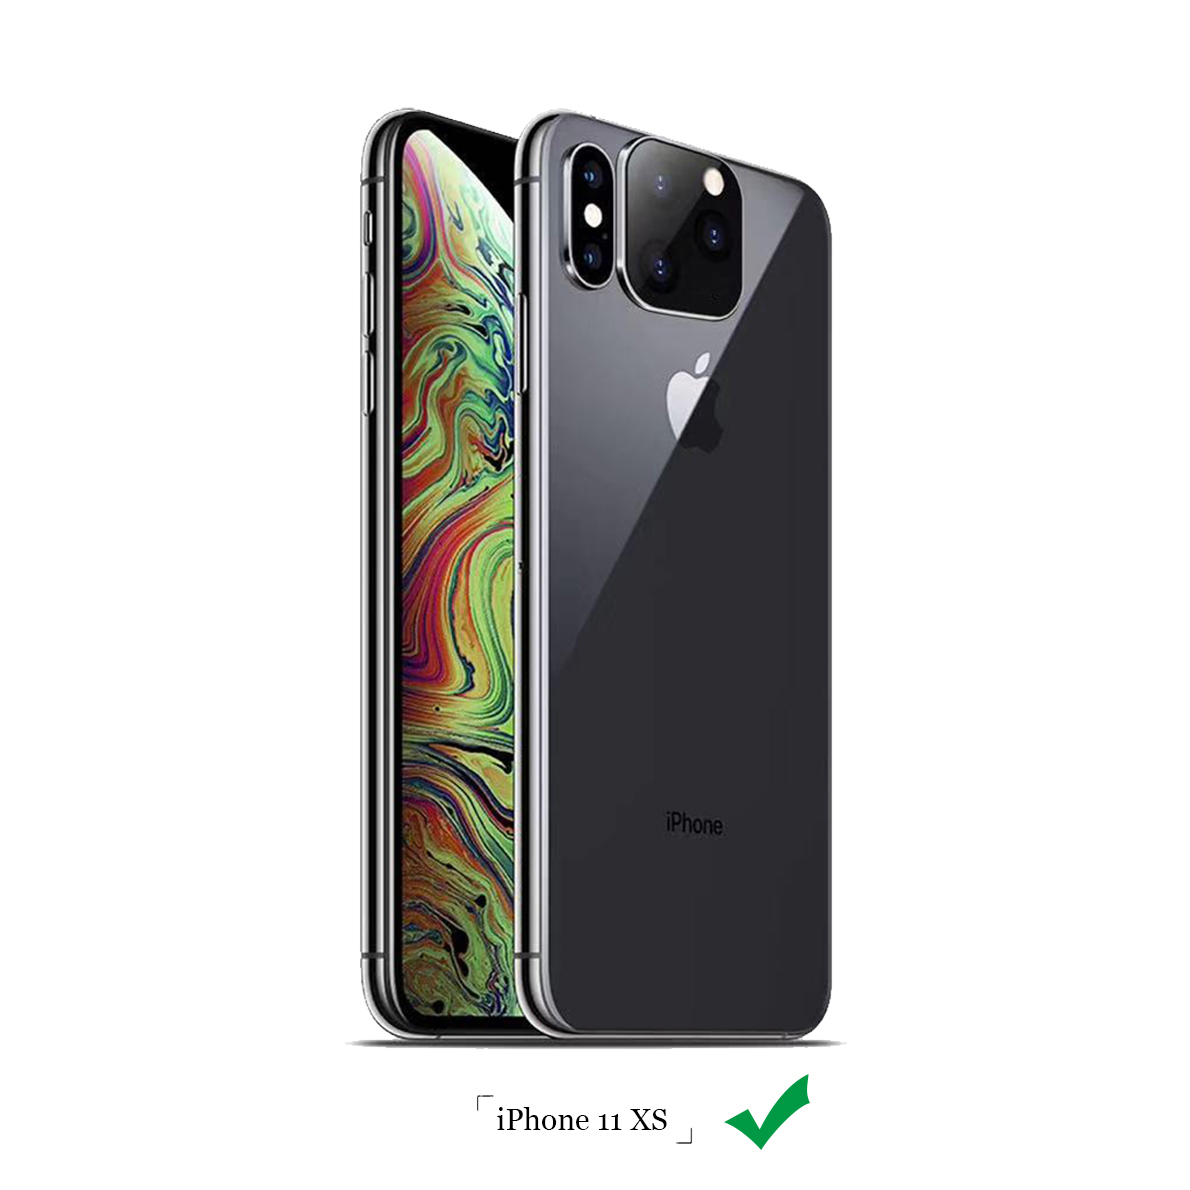 Bakeey-Converted-Change-iPhone-XS-to-iphone-11-Pro-Max-Second-Change-Metal--Tempered-Glass-2-in-1-An-1587795-6